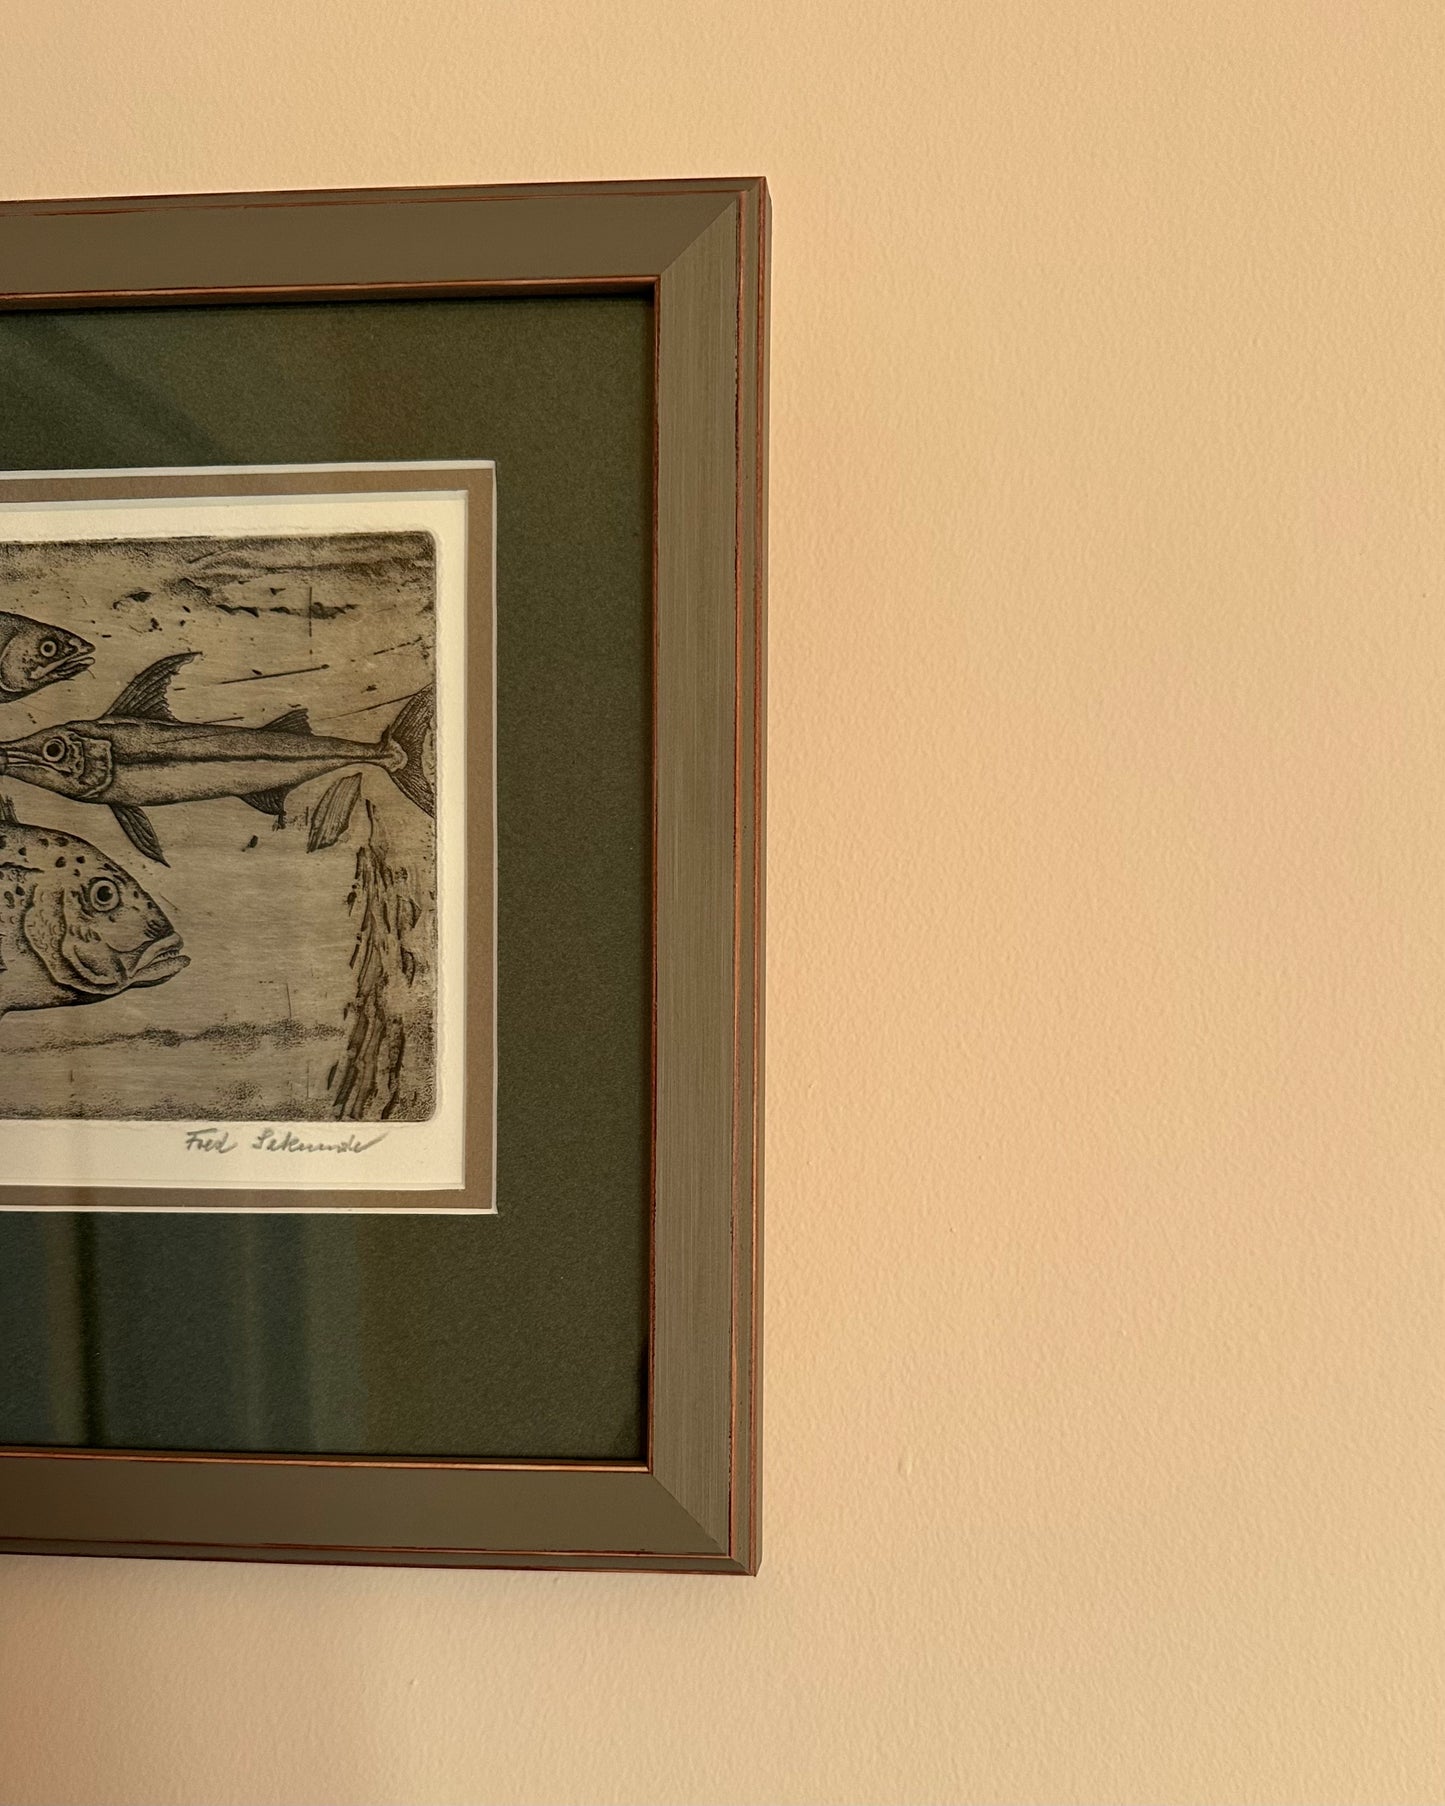 Framed Fish Lithograph